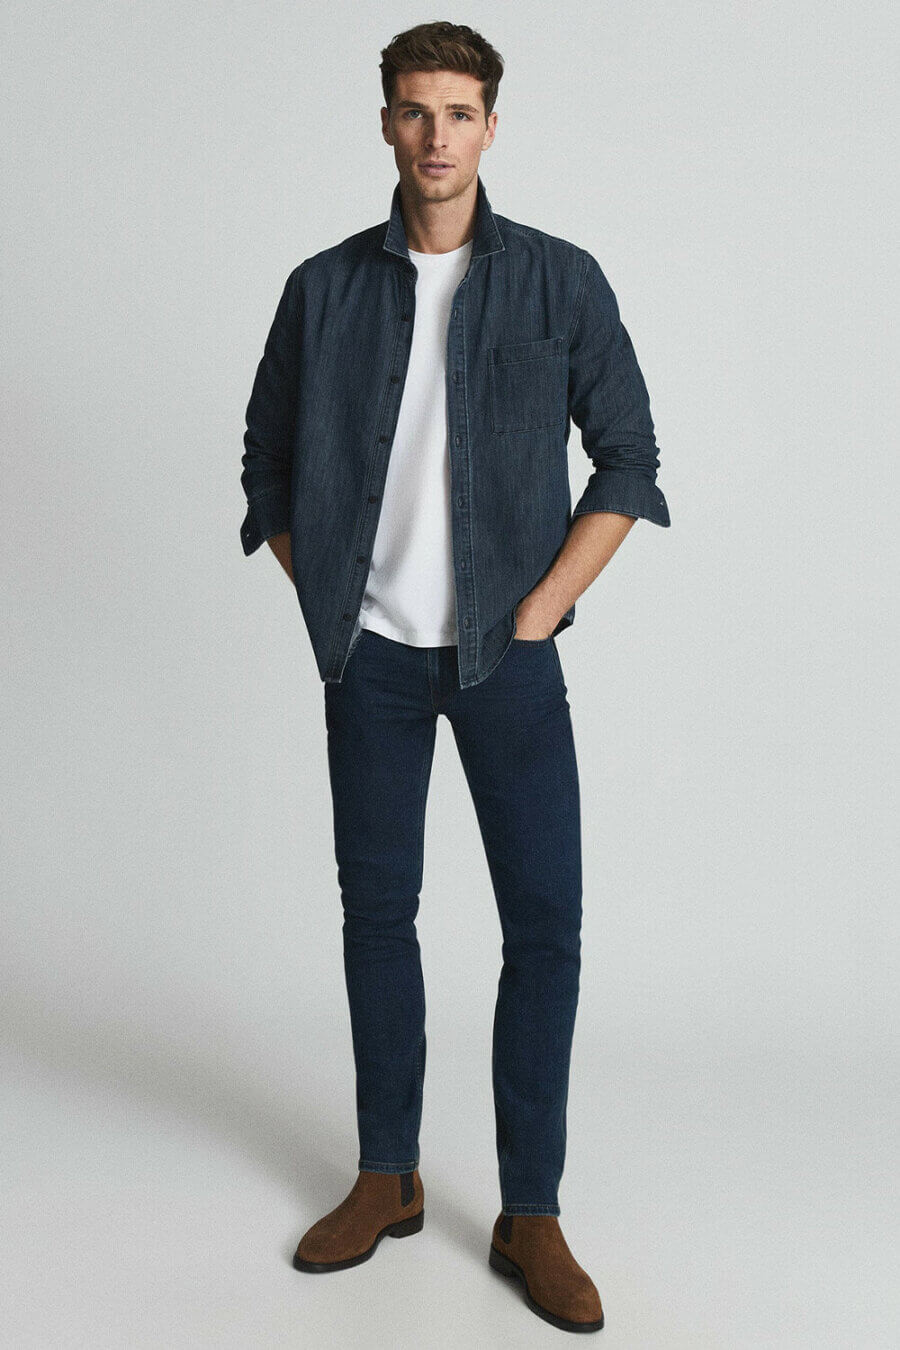 Men's Double Denim Outfit - blue jeans and shirt with white T-shirt